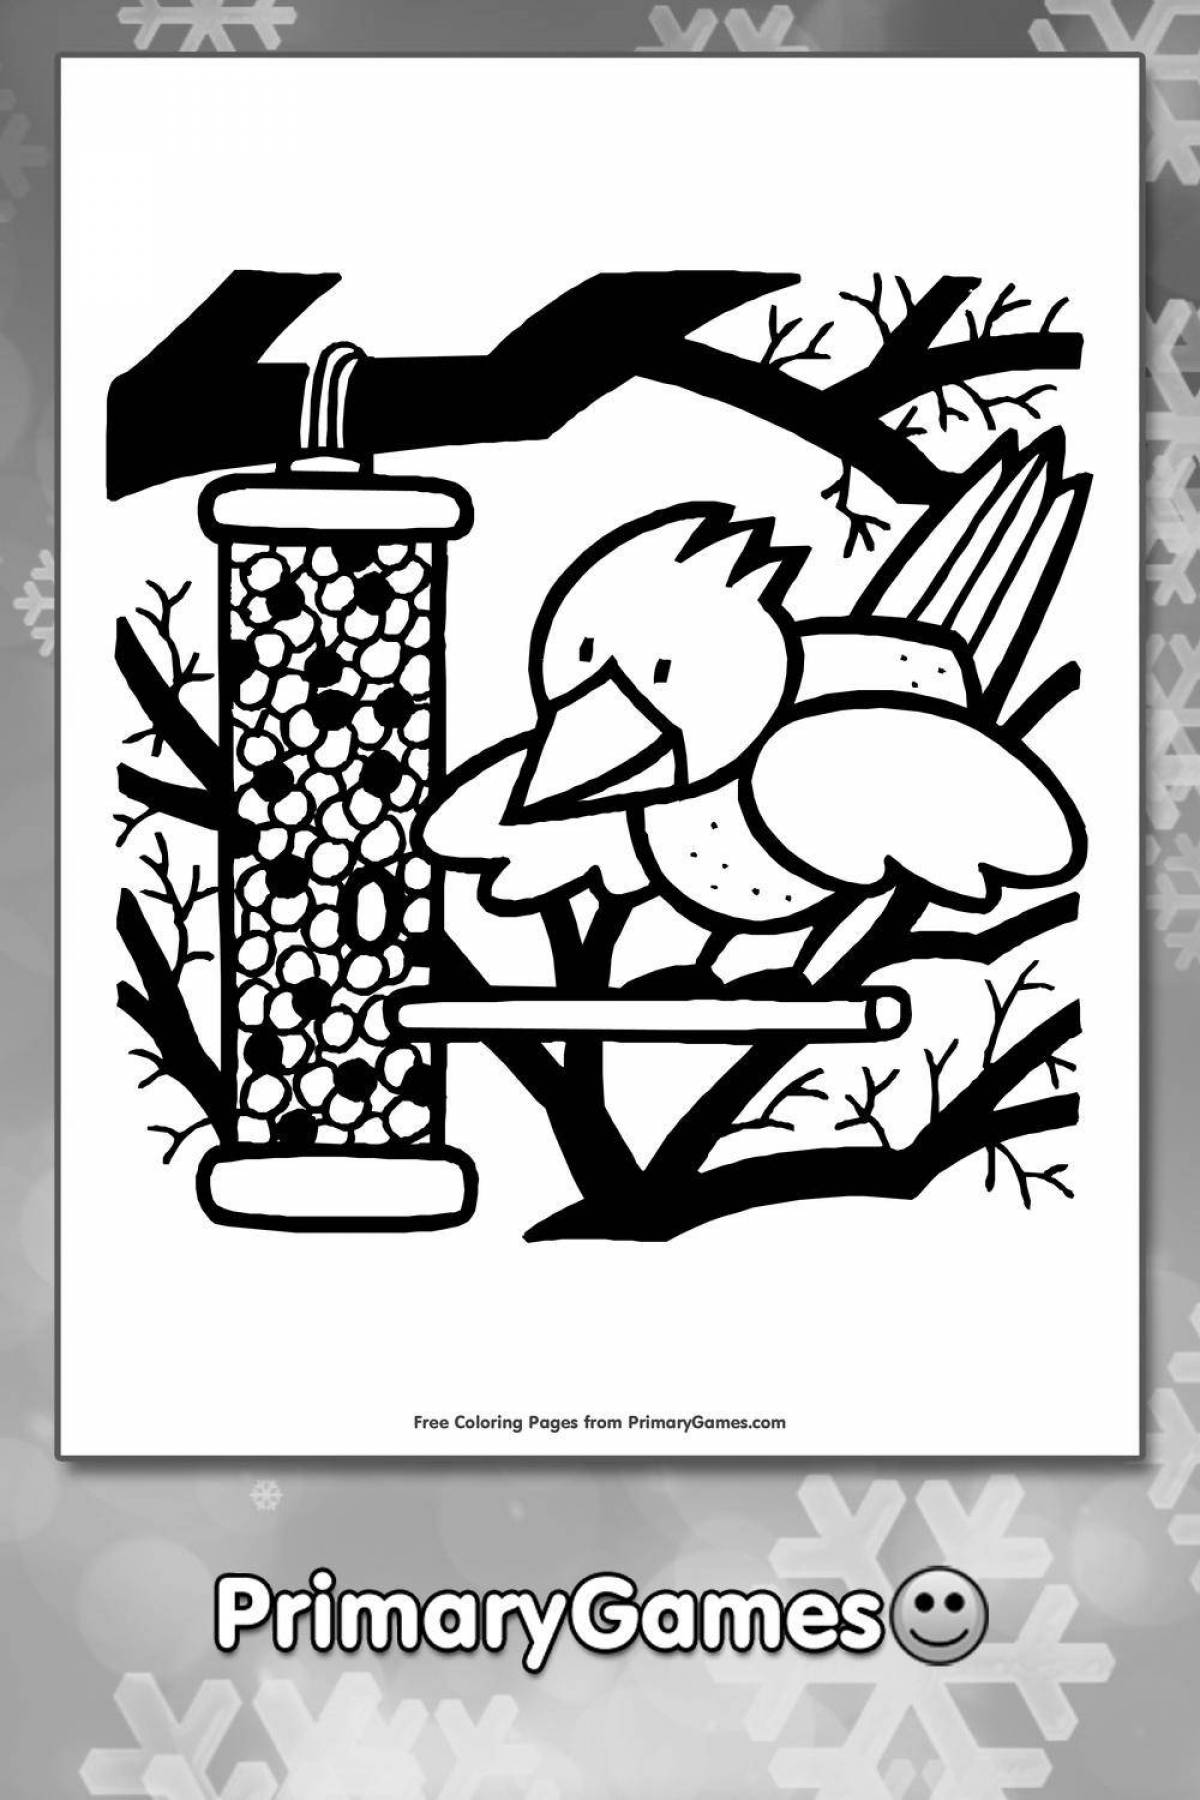 Amazing bird feeder coloring page for juniors